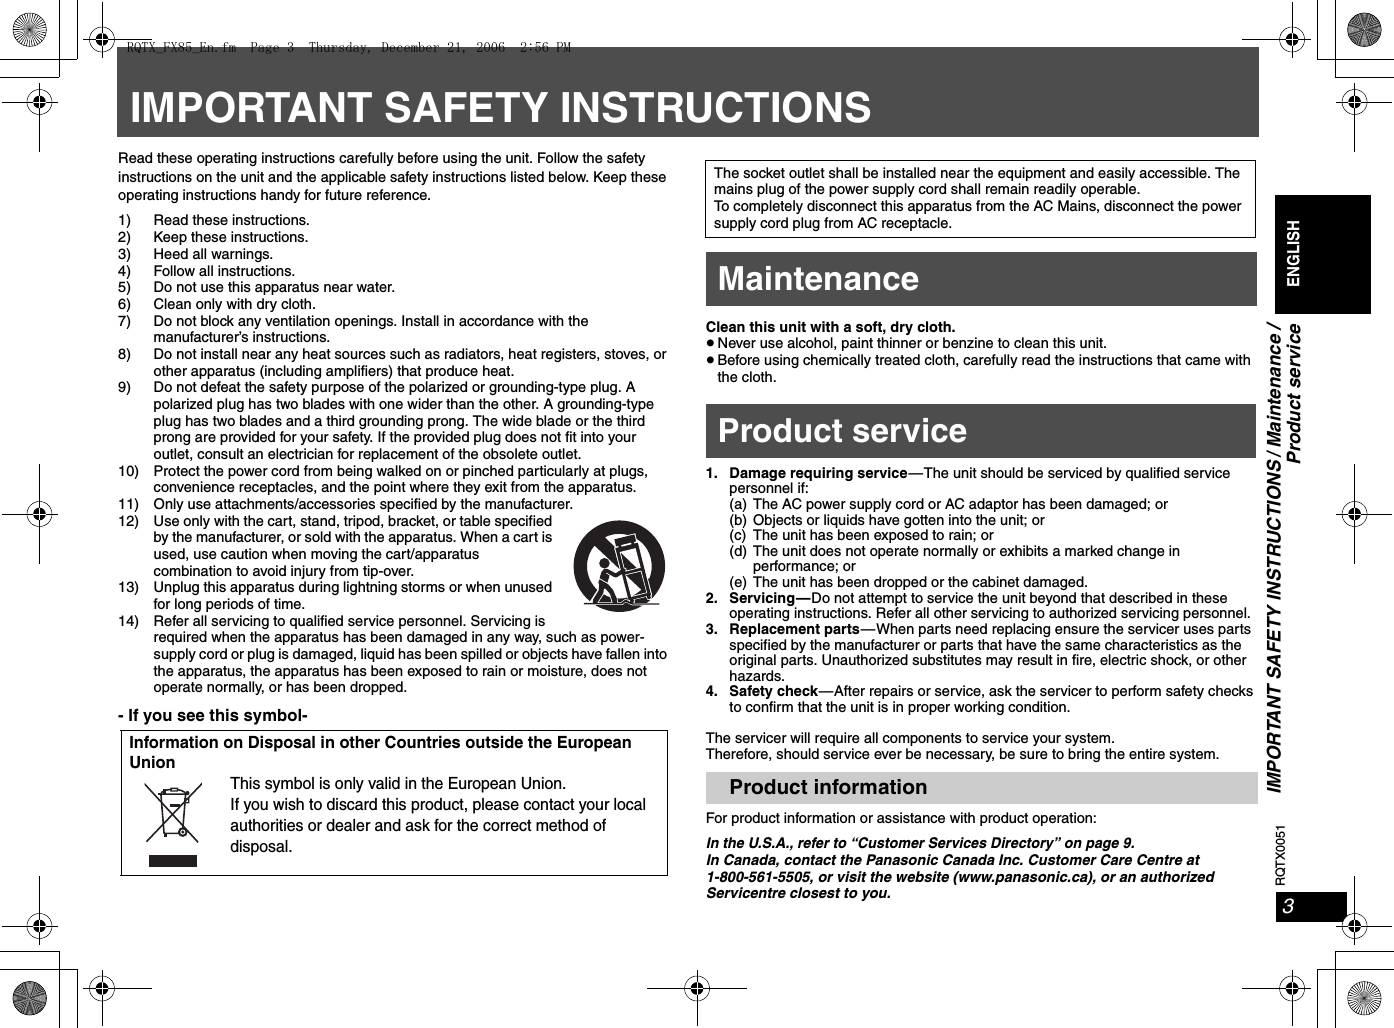 RQTX00513ENGLISHIMPORTANT SAFETY INSTRUCTIONS / Maintenance /Product serviceIMPORTANT SAFETY INSTRUCTIONSRead these operating instructions carefully before using the unit. Follow the safety instructions on the unit and the applicable safety instructions listed below. Keep these operating instructions handy for future reference.1) Read these instructions.2) Keep these instructions.3) Heed all warnings.4) Follow all instructions.5) Do not use this apparatus near water.6) Clean only with dry cloth.7) Do not block any ventilation openings. Install in accordance with the manufacturer’s instructions.8) Do not install near any heat sources such as radiators, heat registers, stoves, or other apparatus (including amplifiers) that produce heat.9) Do not defeat the safety purpose of the polarized or grounding-type plug. A polarized plug has two blades with one wider than the other. A grounding-type plug has two blades and a third grounding prong. The wide blade or the third prong are provided for your safety. If the provided plug does not fit into your outlet, consult an electrician for replacement of the obsolete outlet.10) Protect the power cord from being walked on or pinched particularly at plugs, convenience receptacles, and the point where they exit from the apparatus.11) Only use attachments/accessories specified by the manufacturer.12) Use only with the cart, stand, tripod, bracket, or table specified by the manufacturer, or sold with the apparatus. When a cart is used, use caution when moving the cart/apparatus combination to avoid injury from tip-over.13) Unplug this apparatus during lightning storms or when unused for long periods of time.14) Refer all servicing to qualified service personnel. Servicing is required when the apparatus has been damaged in any way, such as power-supply cord or plug is damaged, liquid has been spilled or objects have fallen into the apparatus, the apparatus has been exposed to rain or moisture, does not operate normally, or has been dropped.- If you see this symbol-Clean this unit with a soft, dry cloth.≥Never use alcohol, paint thinner or benzine to clean this unit.≥Before using chemically treated cloth, carefully read the instructions that came with the cloth.1. Damage requiring service—The unit should be serviced by qualified service personnel if:(a) The AC power supply cord or AC adaptor has been damaged; or(b) Objects or liquids have gotten into the unit; or(c) The unit has been exposed to rain; or(d) The unit does not operate normally or exhibits a marked change in performance; or(e) The unit has been dropped or the cabinet damaged.2. Servicing—Do not attempt to service the unit beyond that described in these operating instructions. Refer all other servicing to authorized servicing personnel.3. Replacement parts—When parts need replacing ensure the servicer uses parts specified by the manufacturer or parts that have the same characteristics as the original parts. Unauthorized substitutes may result in fire, electric shock, or other hazards.4. Safety check—After repairs or service, ask the servicer to perform safety checks to confirm that the unit is in proper working condition.The servicer will require all components to service your system.Therefore, should service ever be necessary, be sure to bring the entire system.For product information or assistance with product operation:In the U.S.A., refer to “Customer Services Directory” on page 9.In Canada, contact the Panasonic Canada Inc. Customer Care Centre at 1-800-561-5505, or visit the website (www.panasonic.ca), or an authorized Servicentre closest to you.Information on Disposal in other Countries outside the European UnionThis symbol is only valid in the European Union.If you wish to discard this product, please contact your local authorities or dealer and ask for the correct method of disposal.The socket outlet shall be installed near the equipment and easily accessible. The mains plug of the power supply cord shall remain readily operable.To completely disconnect this apparatus from the AC Mains, disconnect the power supply cord plug from AC receptacle.MaintenanceProduct serviceProduct informationRQTX_FX85_En.fm  Page 3  Thursday, December 21, 2006  2:56 PM